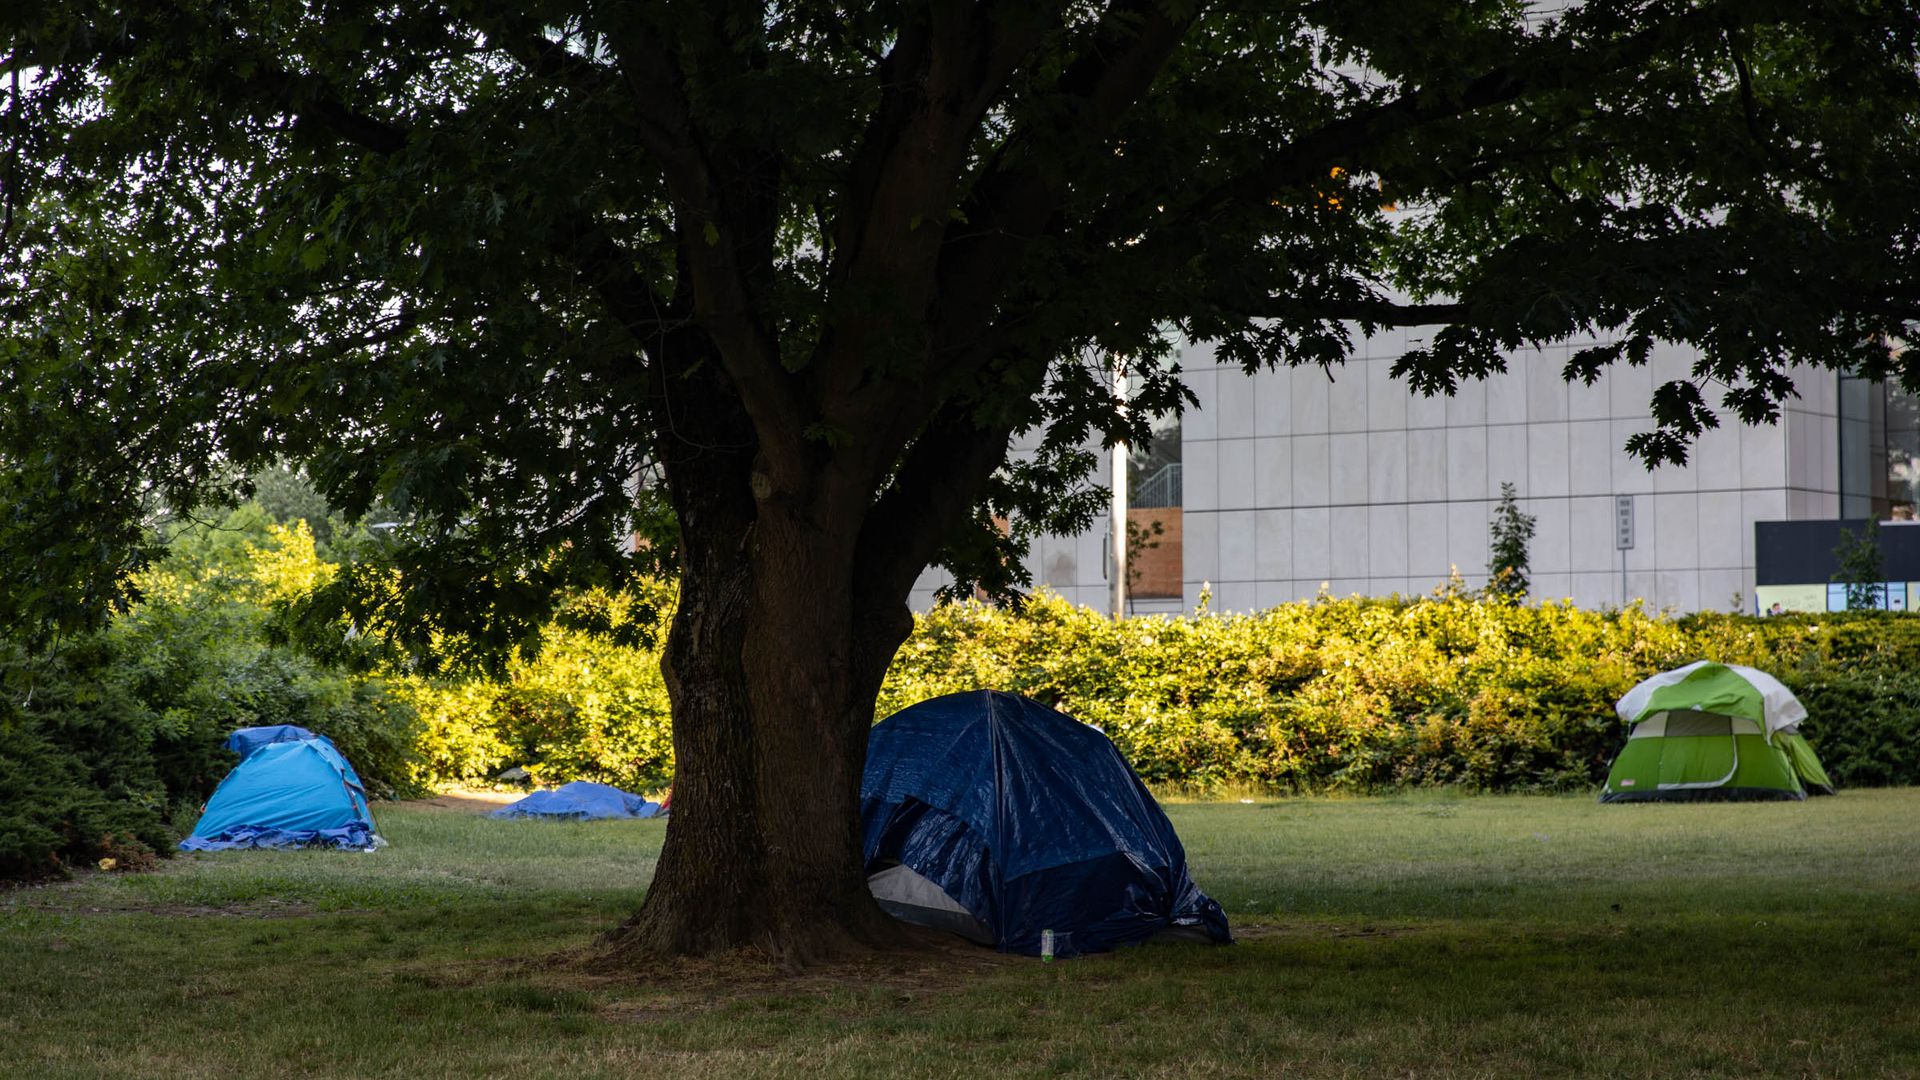 A photo of tents under a tree.